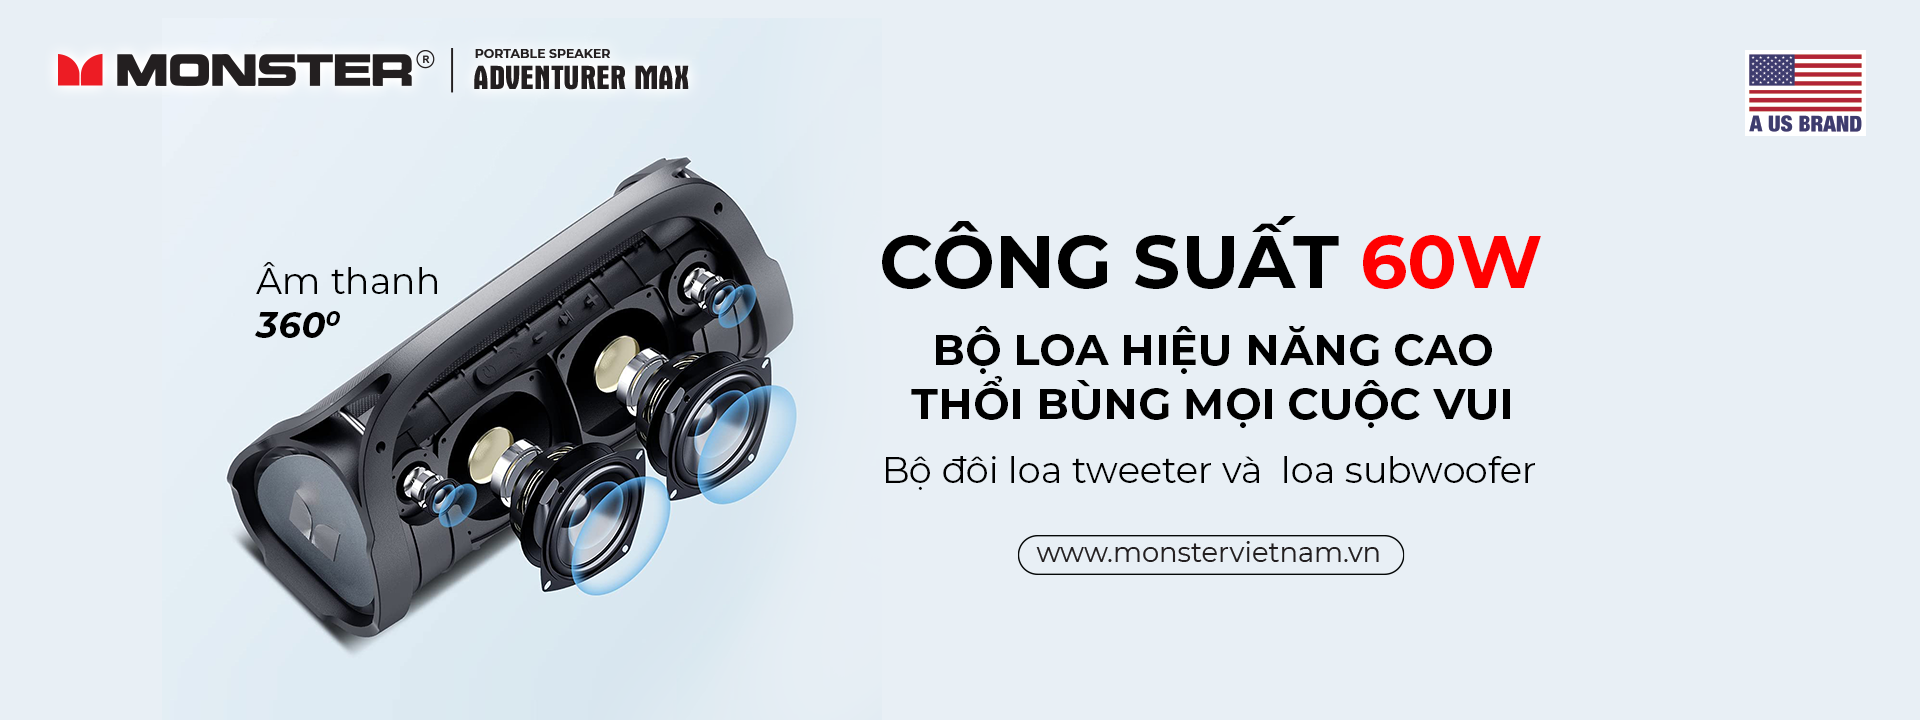 Loa Bluetooth Monster Adventurer MAX | Anh Duy Audio